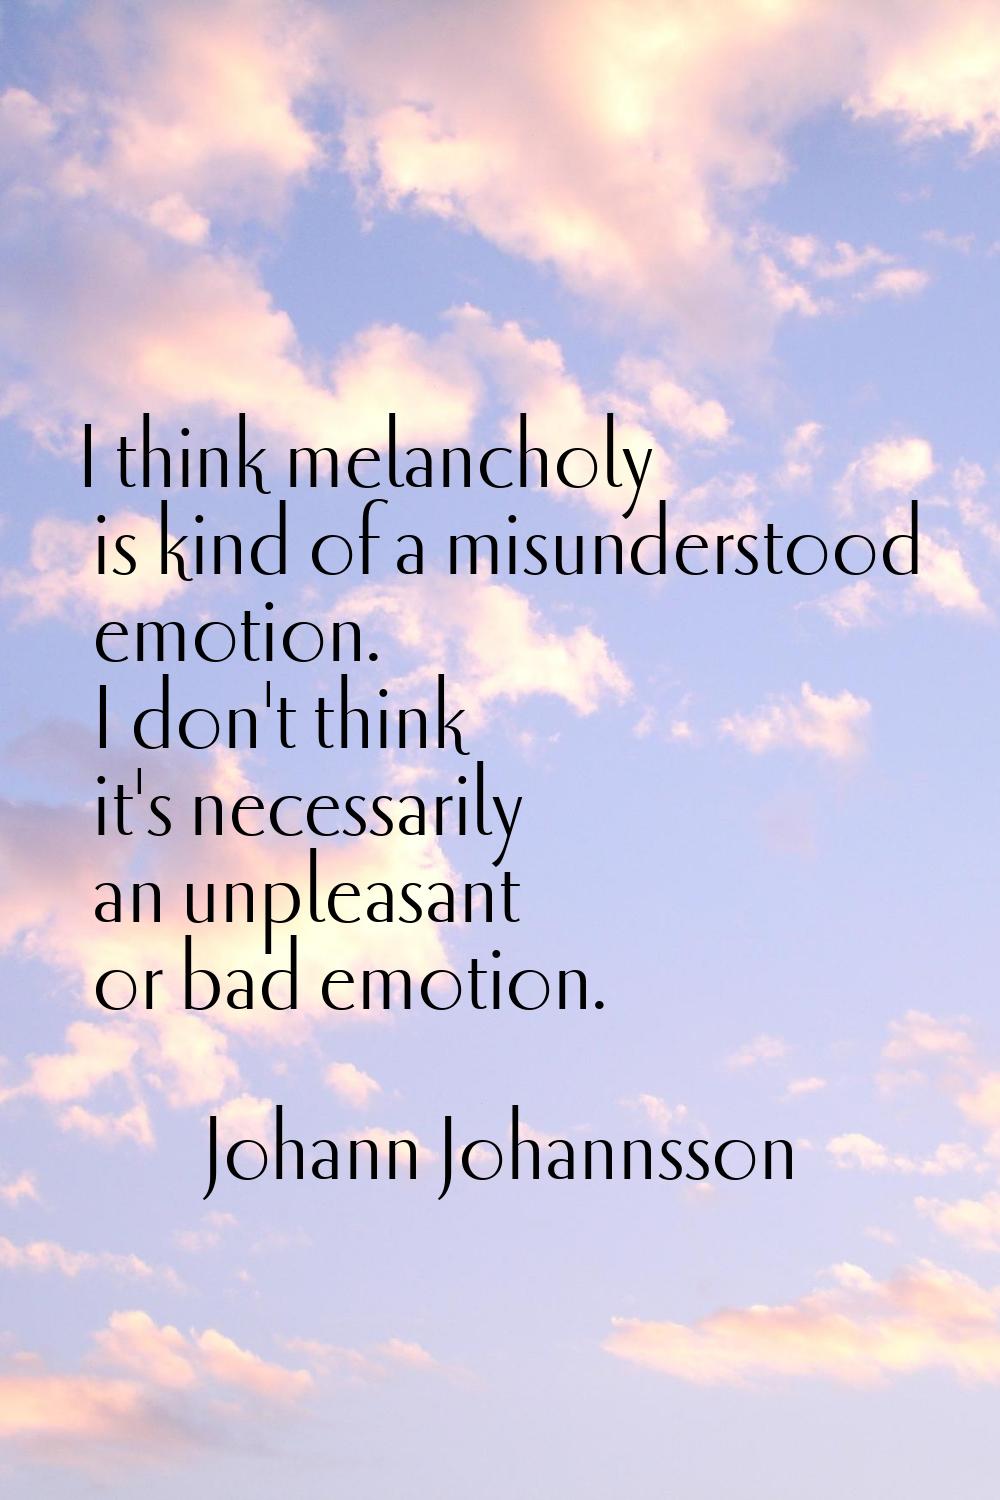 I think melancholy is kind of a misunderstood emotion. I don't think it's necessarily an unpleasant